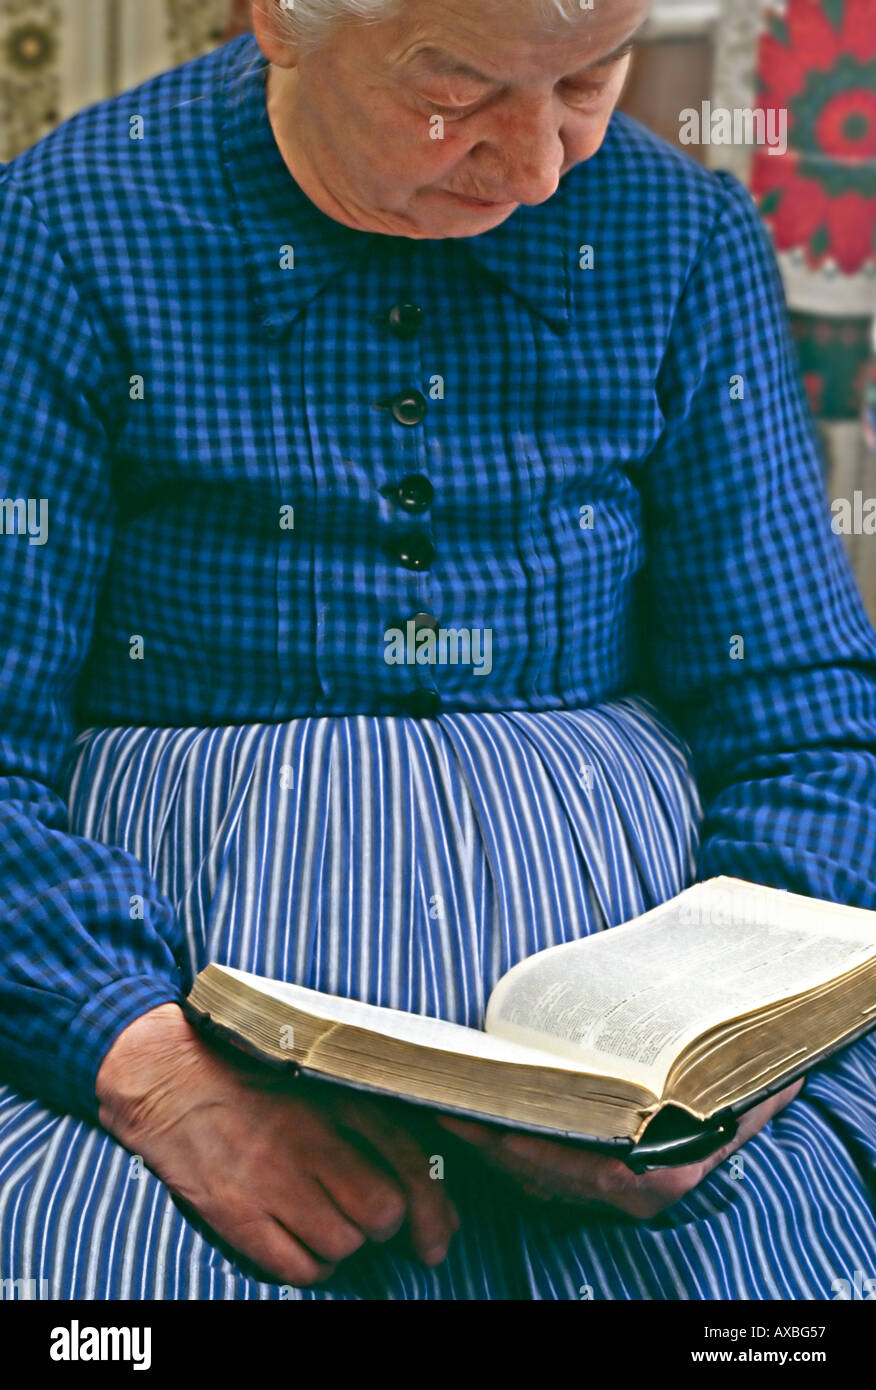 old woman with typical clothes of the region Hesse Germany reading a book the bible Stock Photo